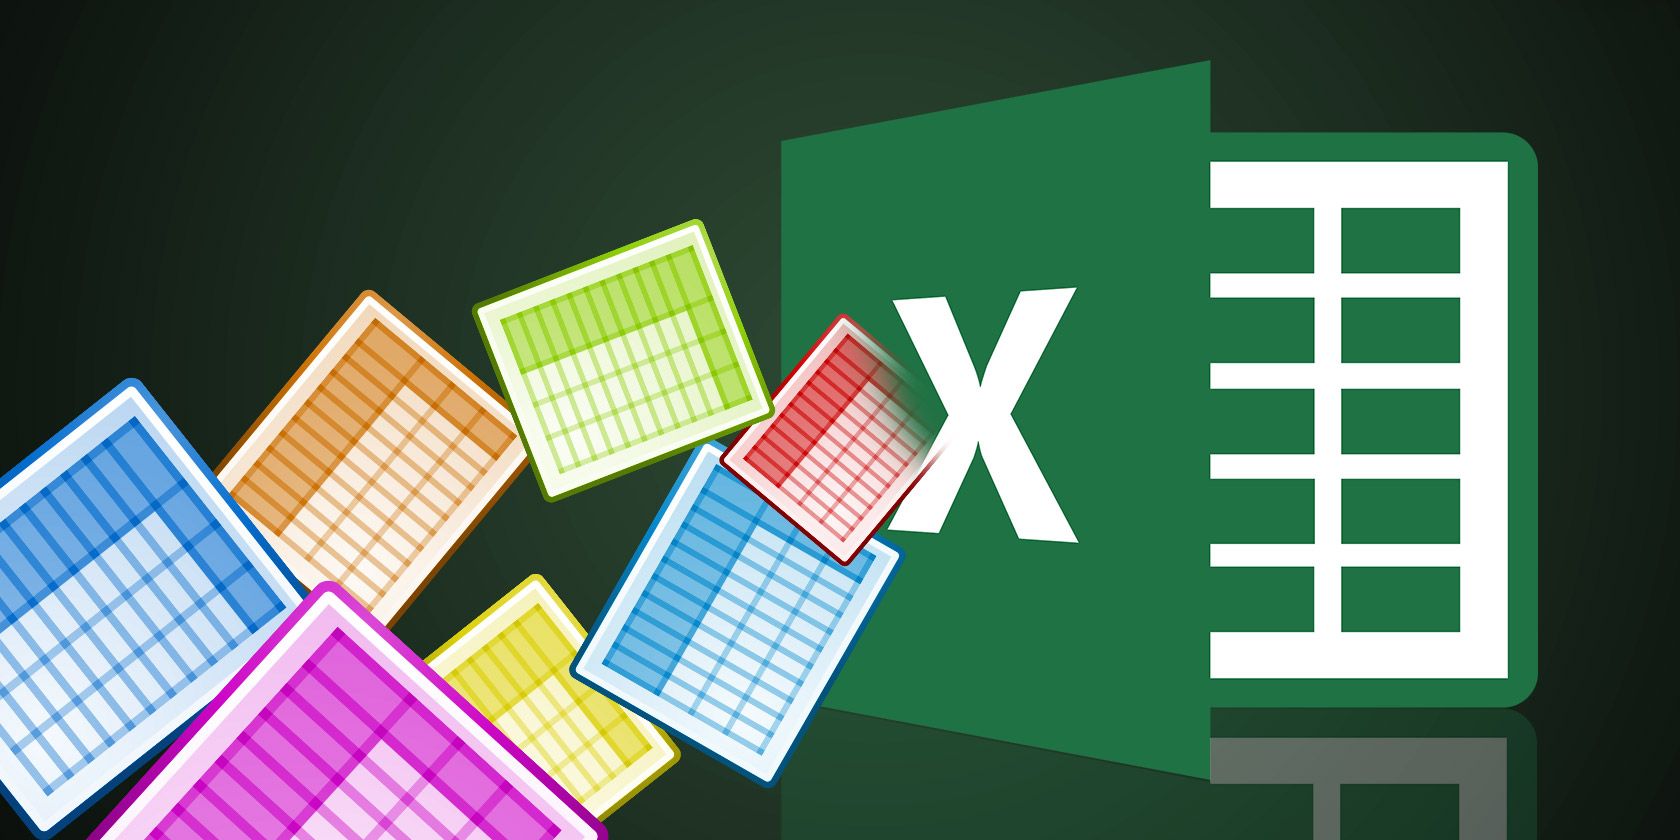 office for mac 2016 this file needs to be opened by the excel workbook converter